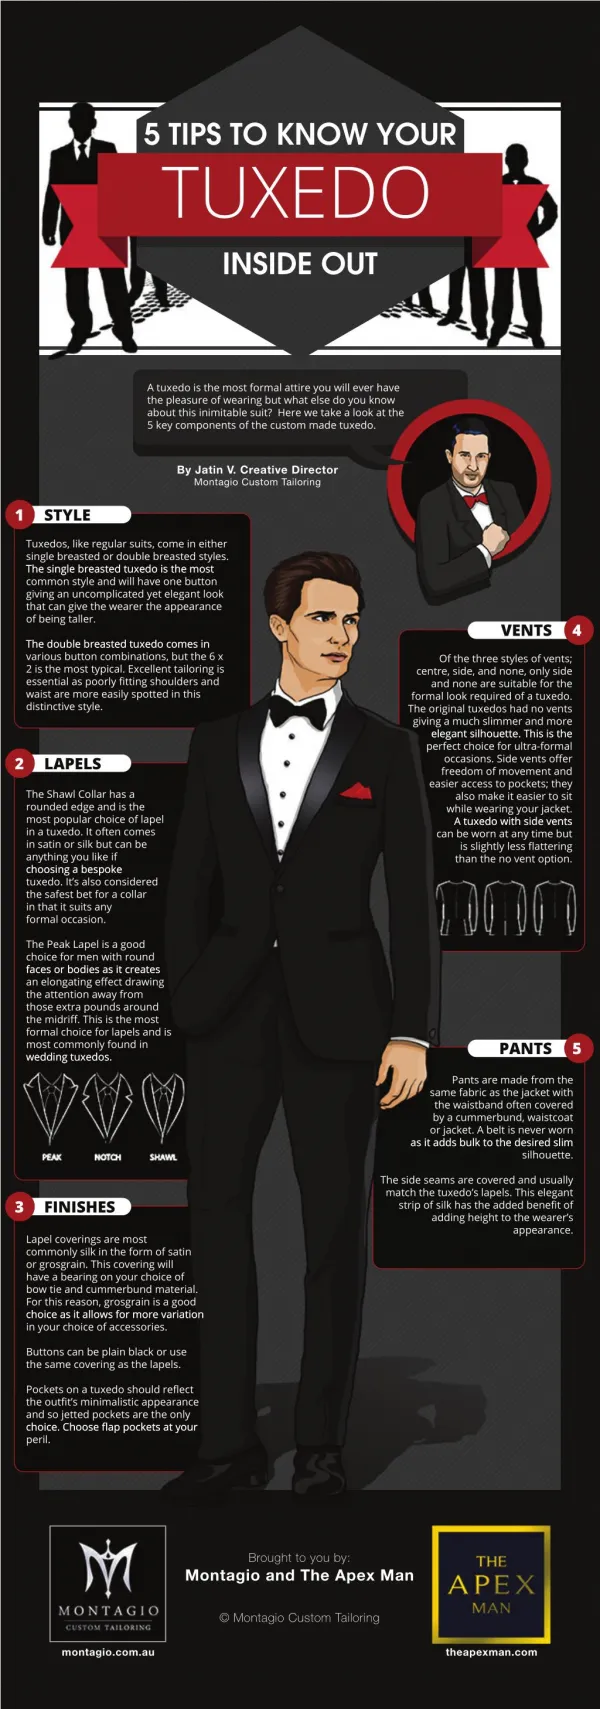 5 Tips to Know Your Tuxedo Inside Out